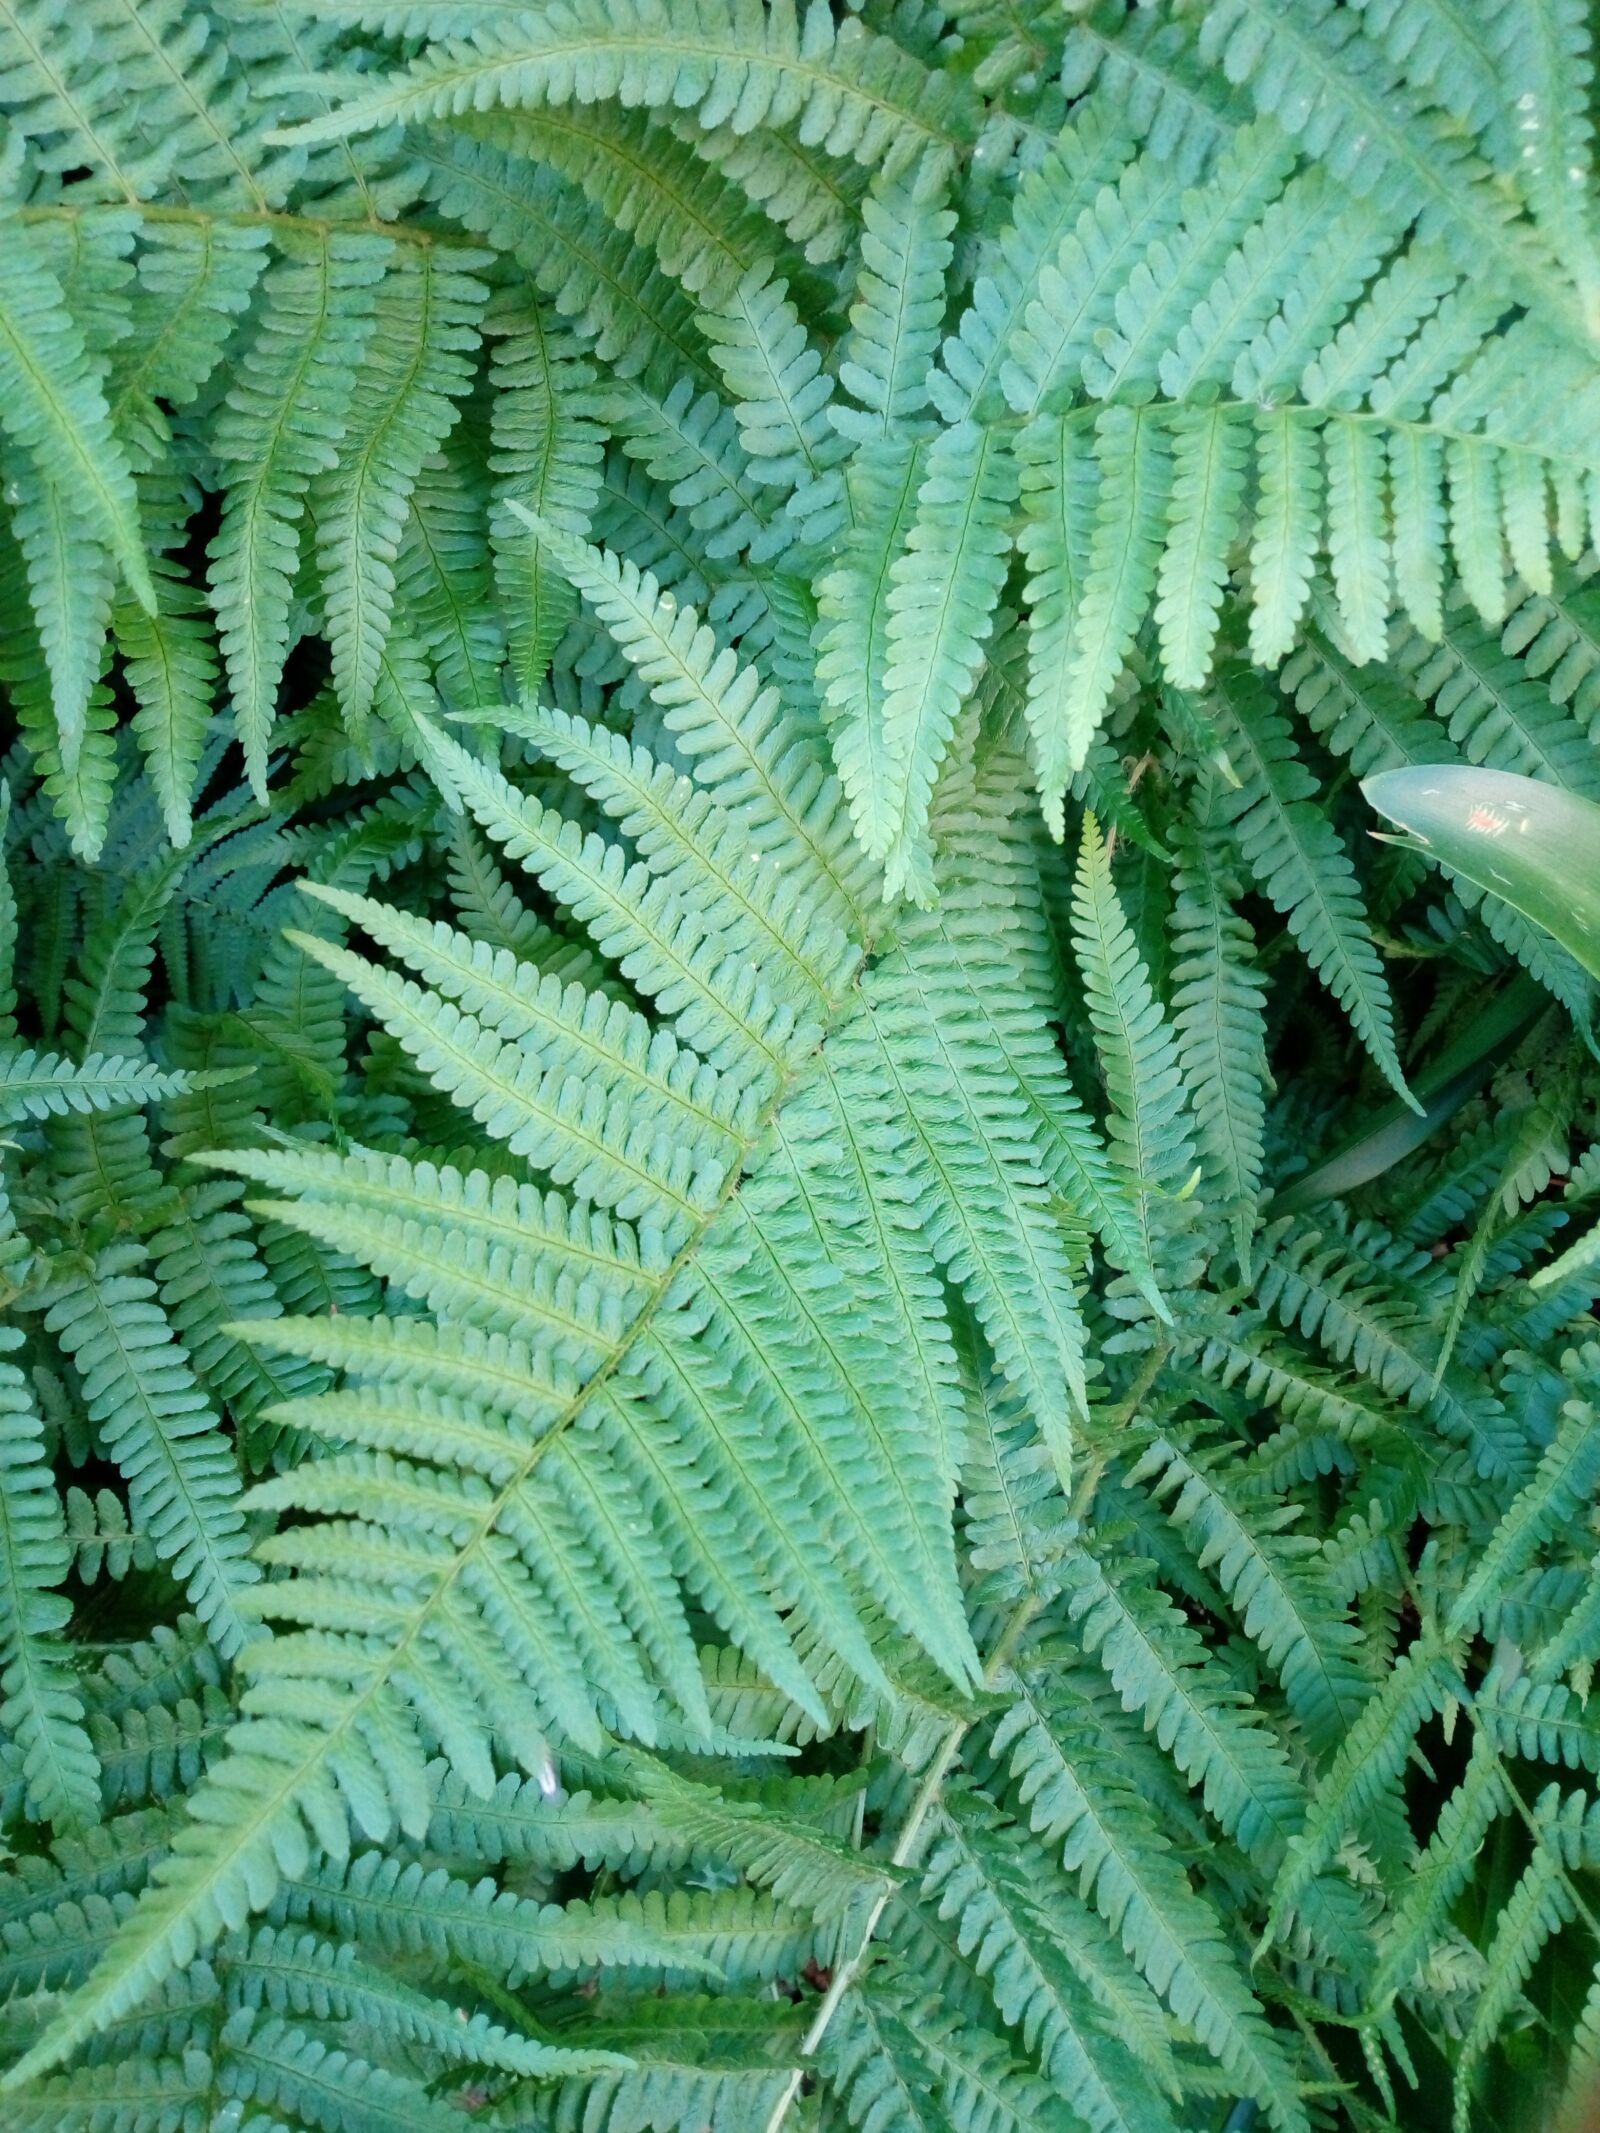 HUAWEI Y6 2017 sample photo. Ferns, green, forest photography